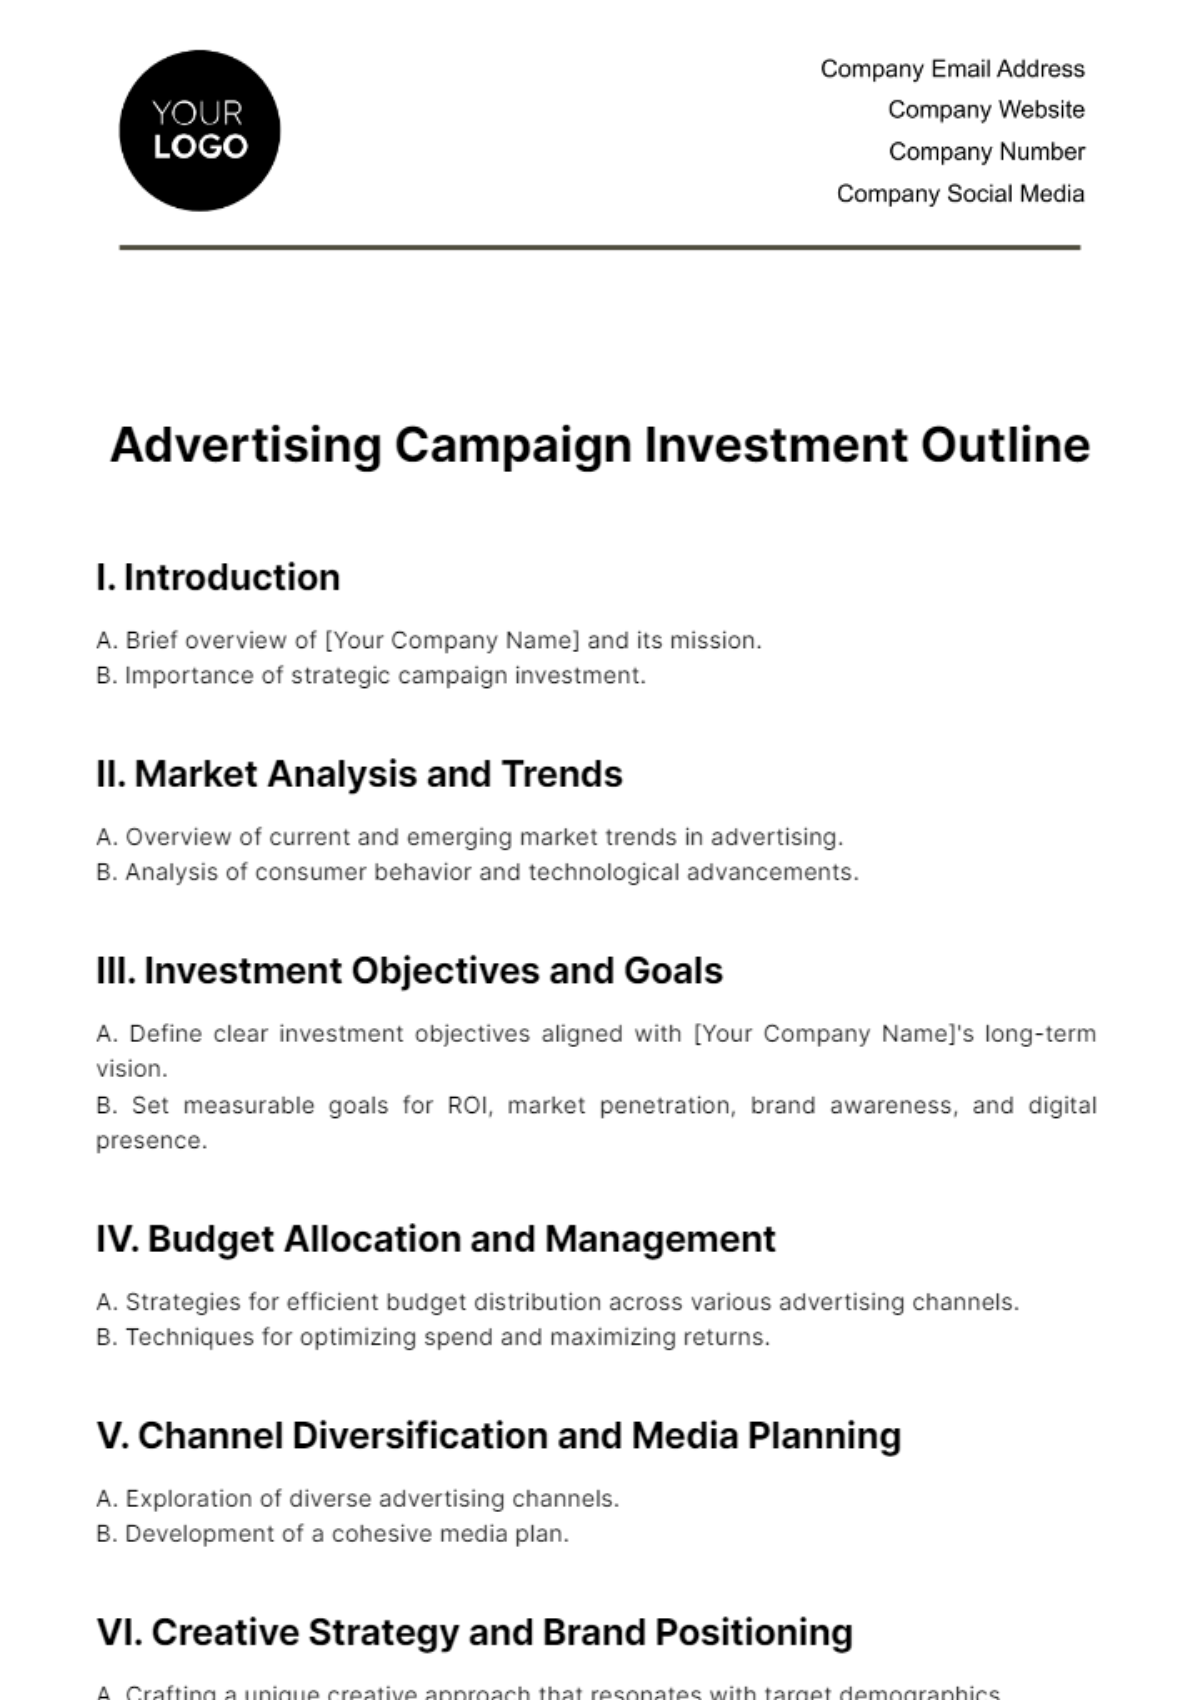 Free Advertising Campaign Investment Outline Template